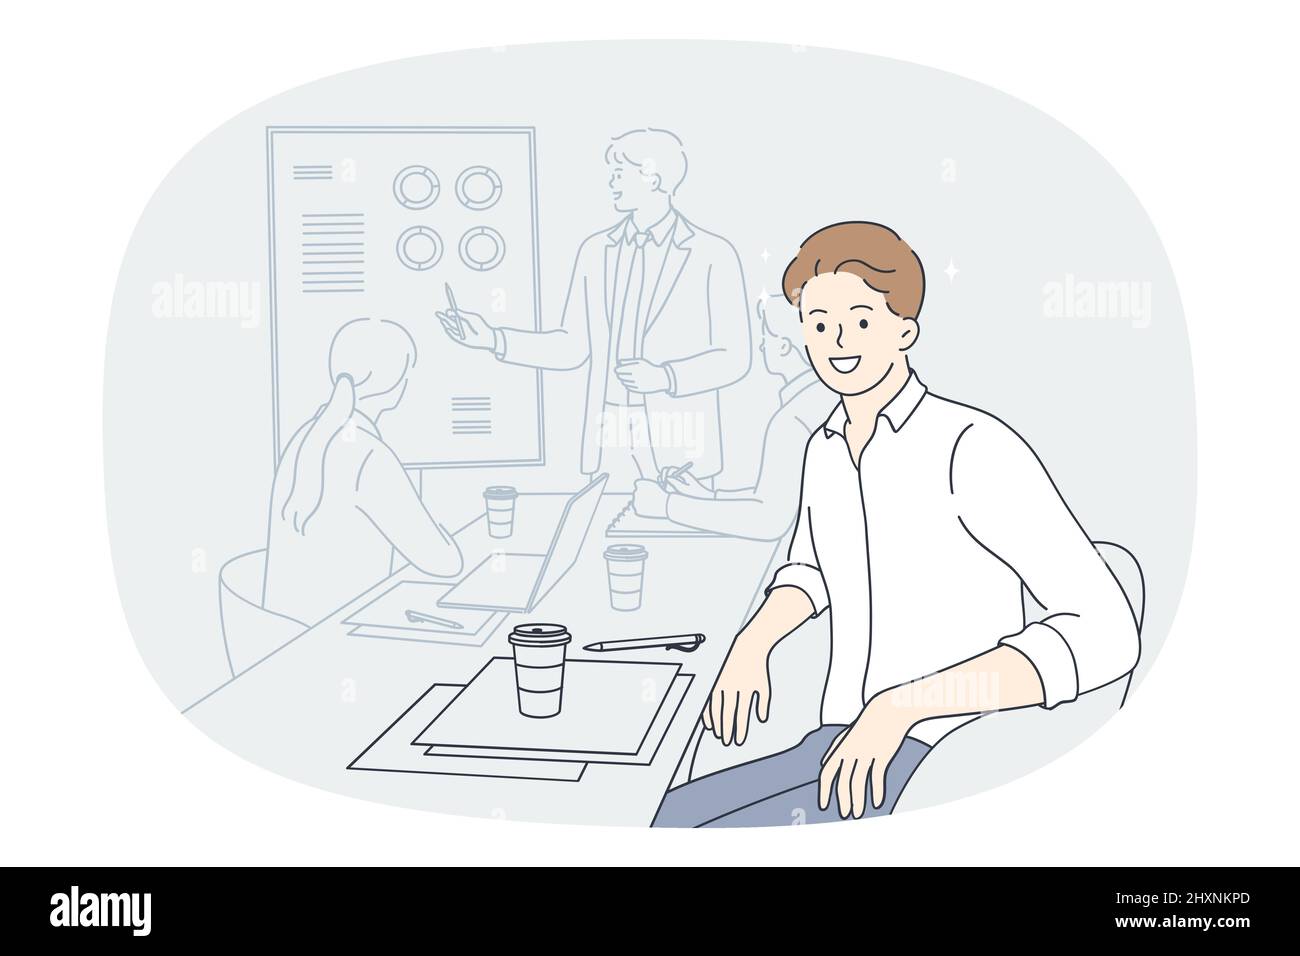 Smiling man employee at team meeting with coach or presenter in office. Happy male worker sit at desk with colleagues having briefing with group leader or boss. Flat vector illustration.  Stock Vector